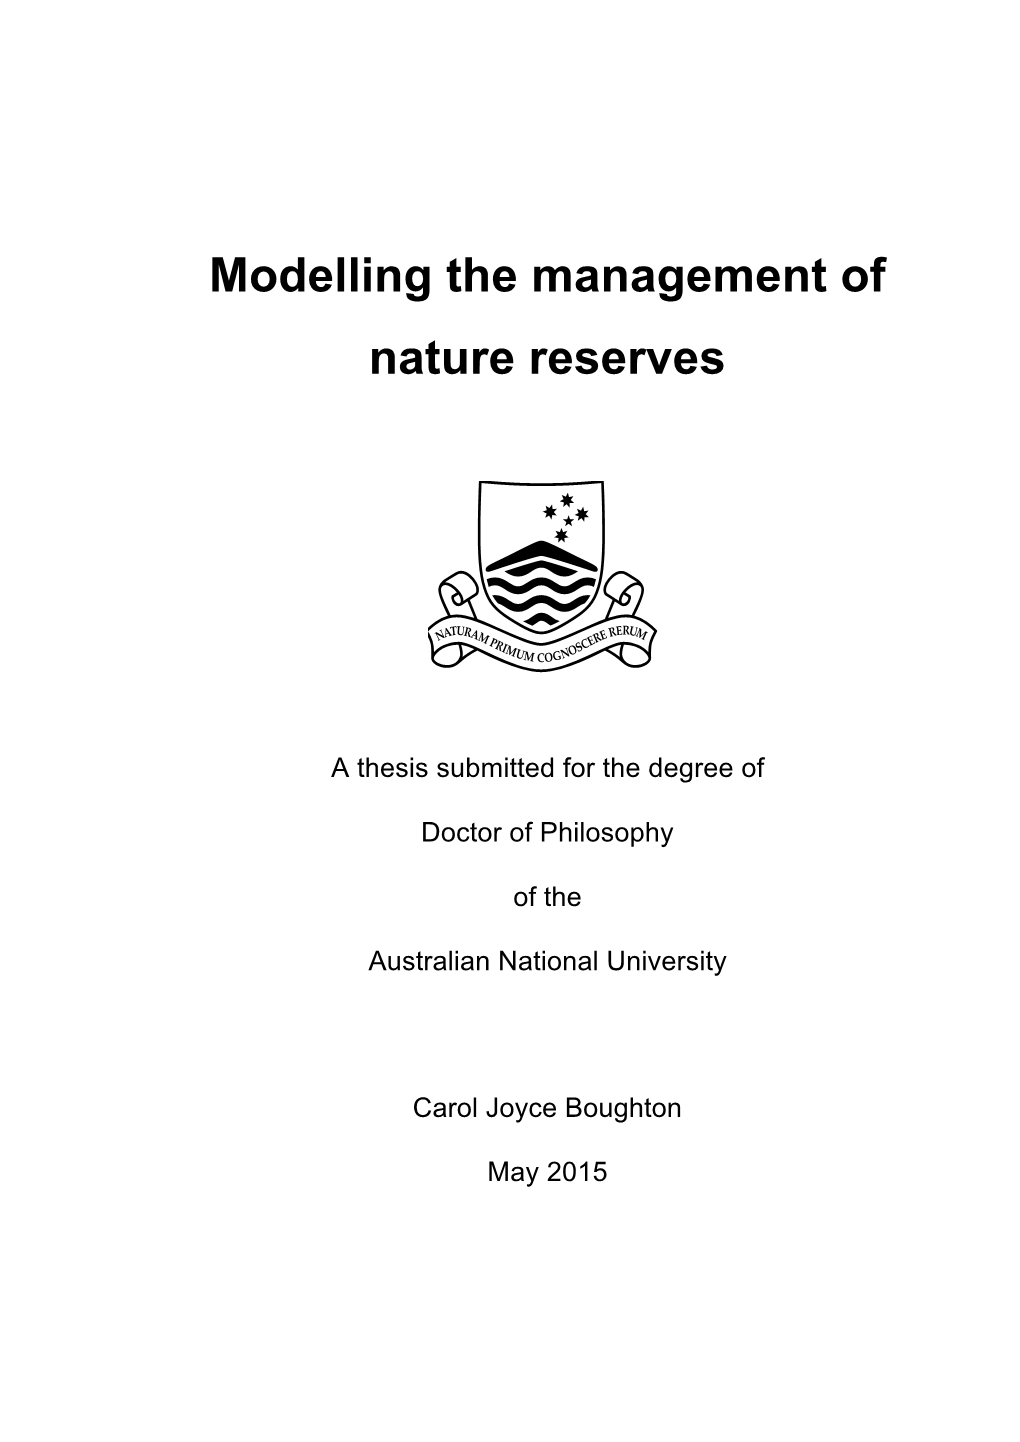 Modelling the Management of Nature Reserves